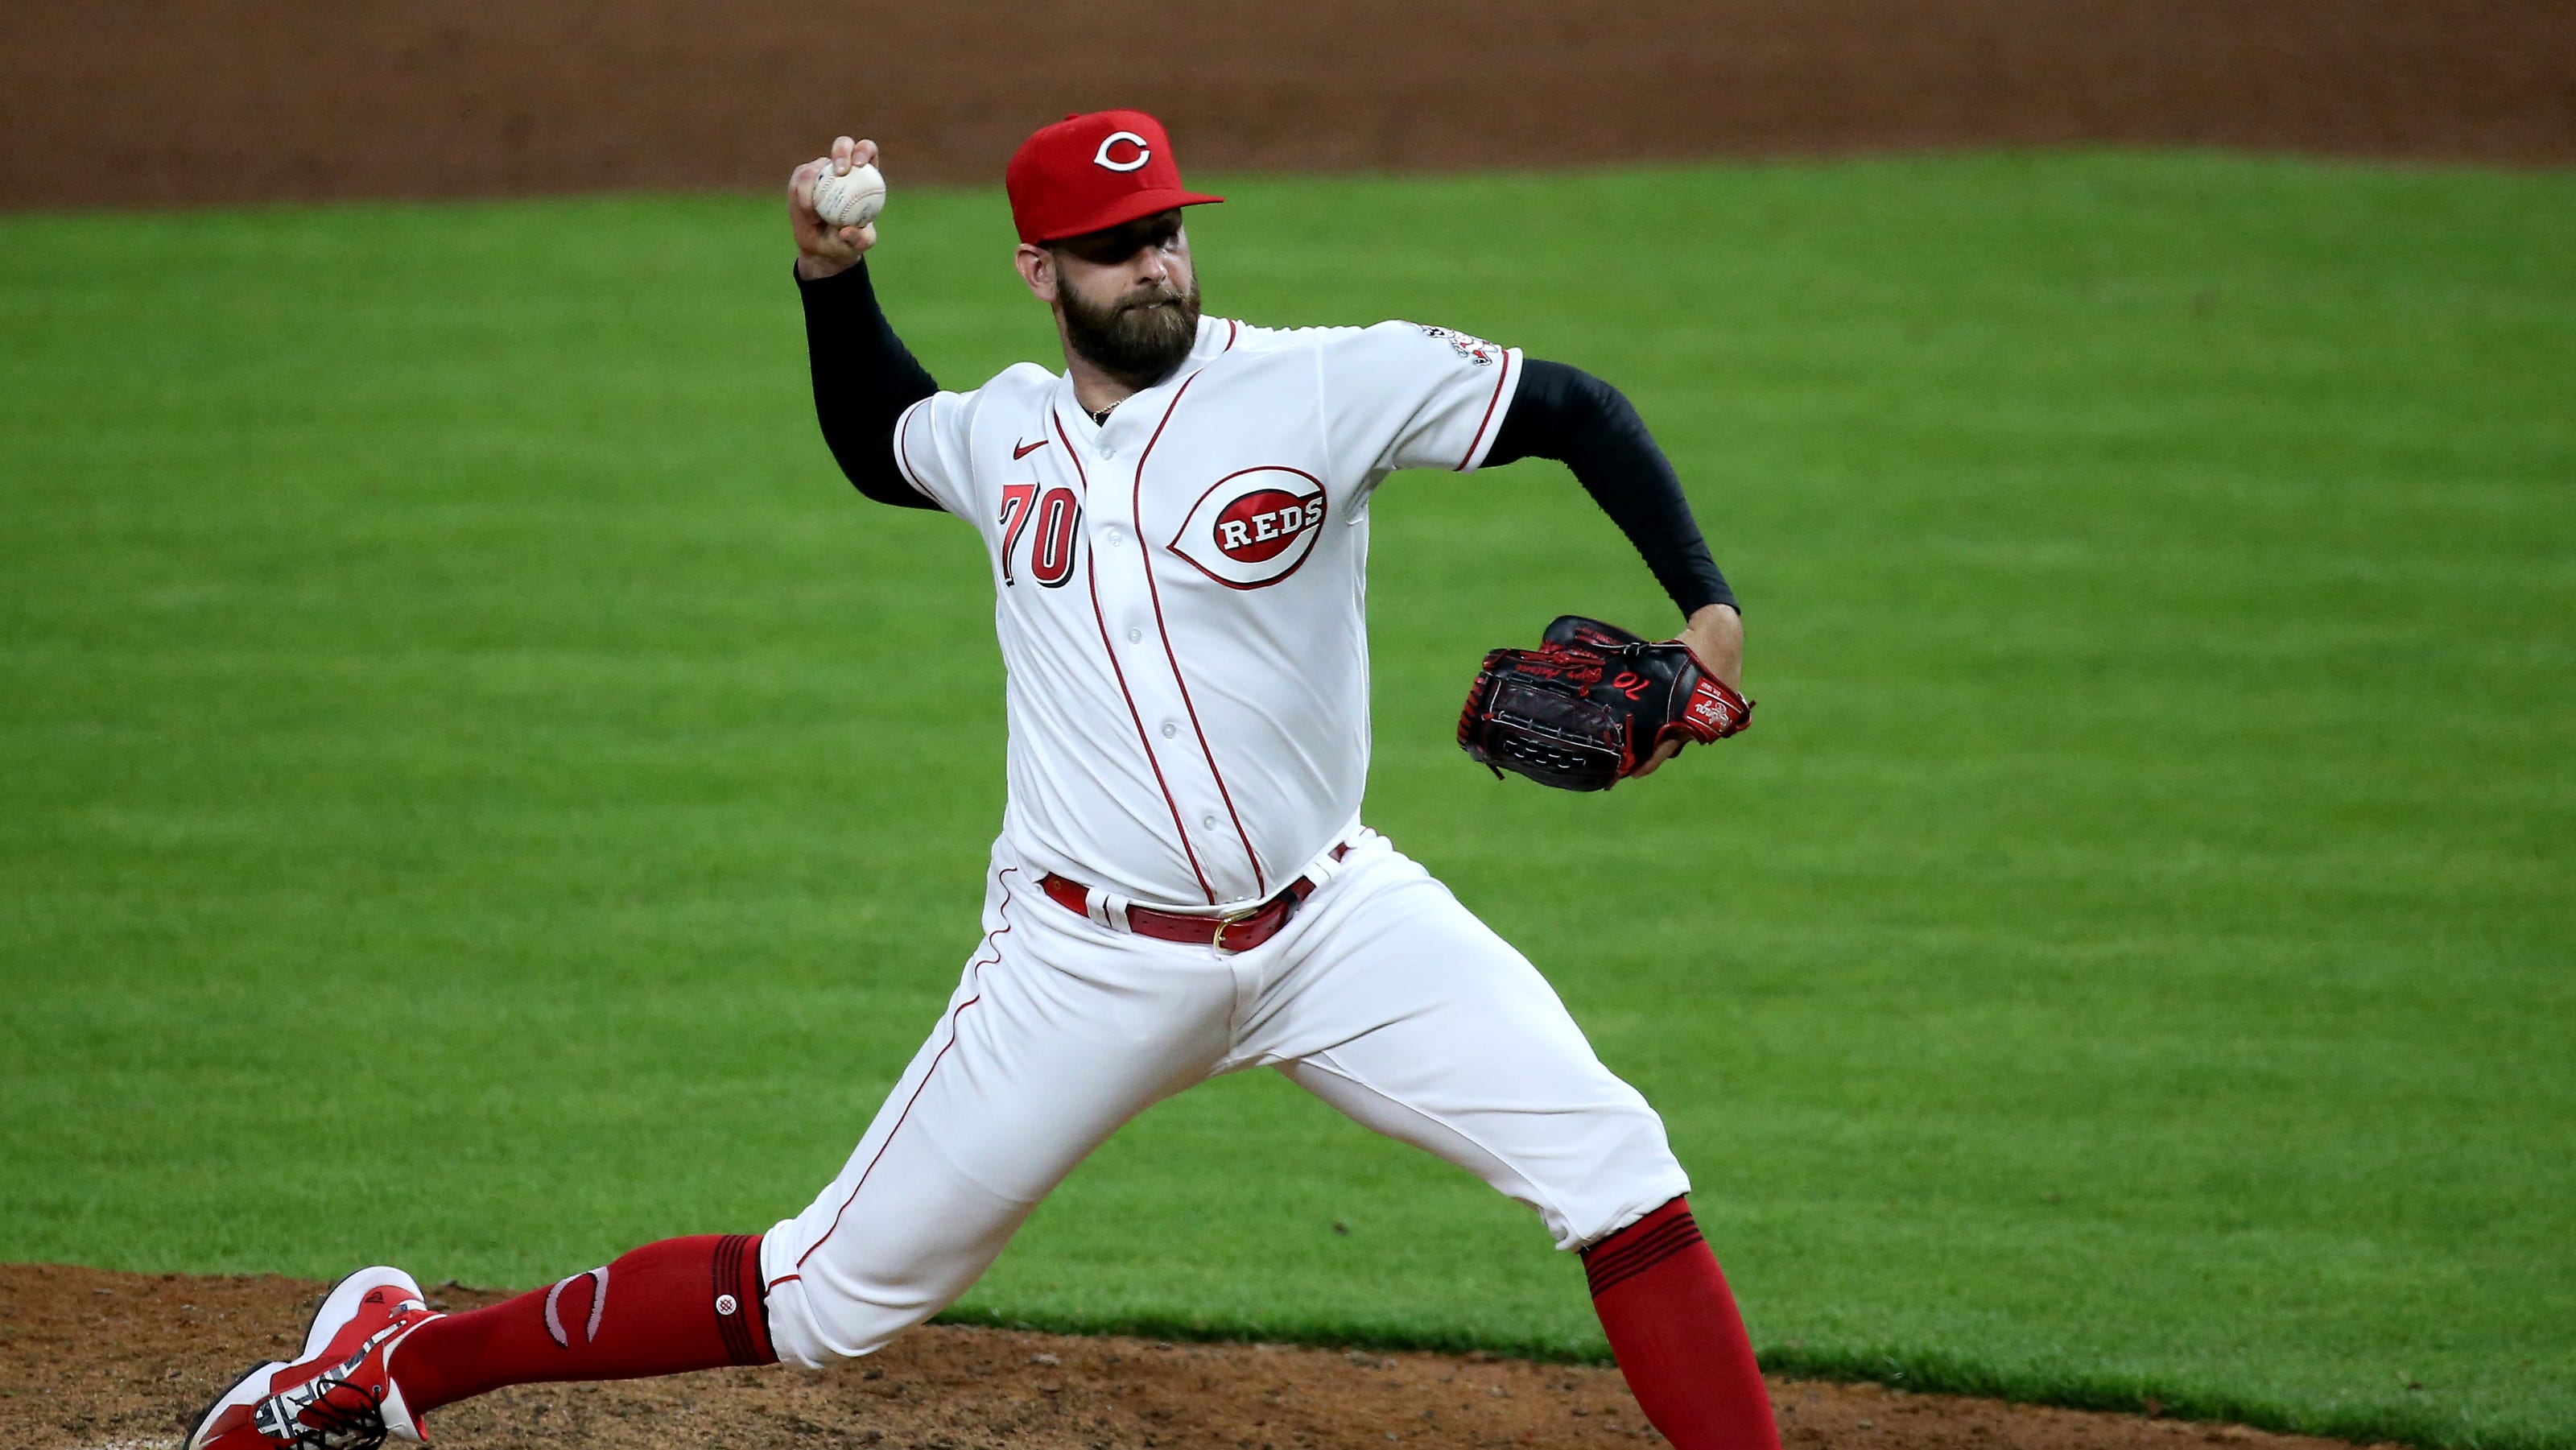 Tejay Antone is the Reds midgame closer